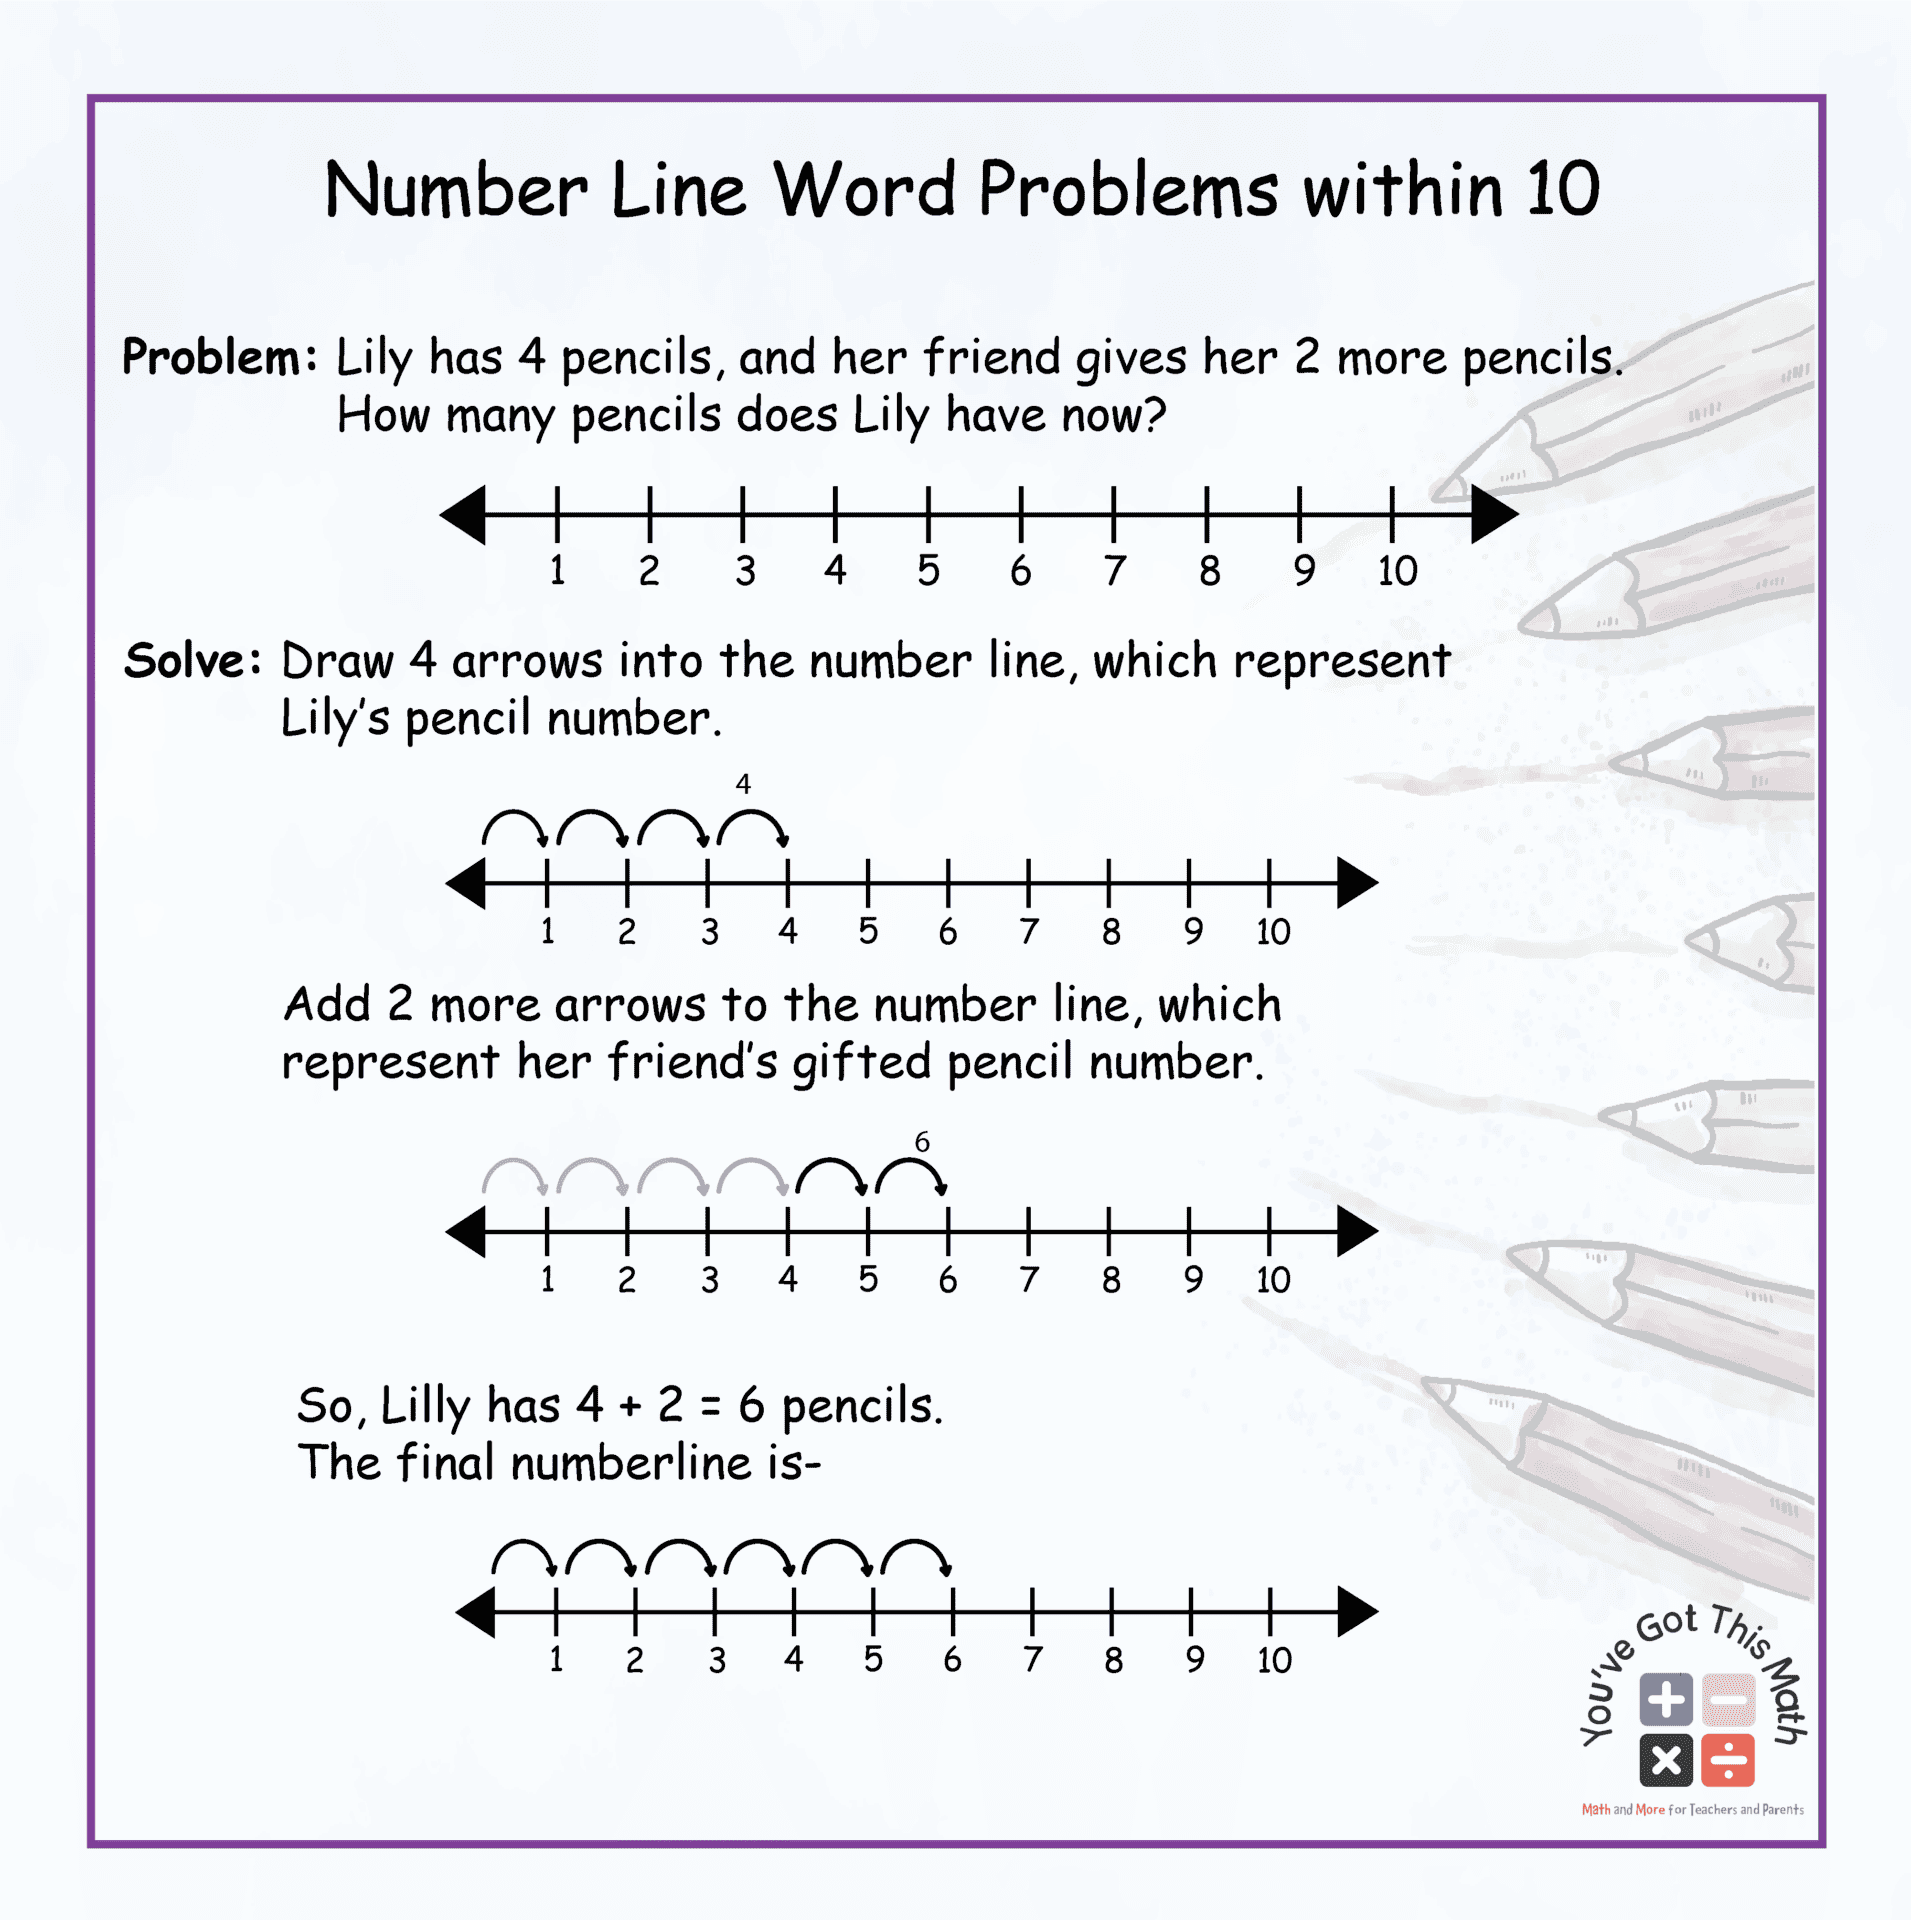 Number Line Word Problems within 10